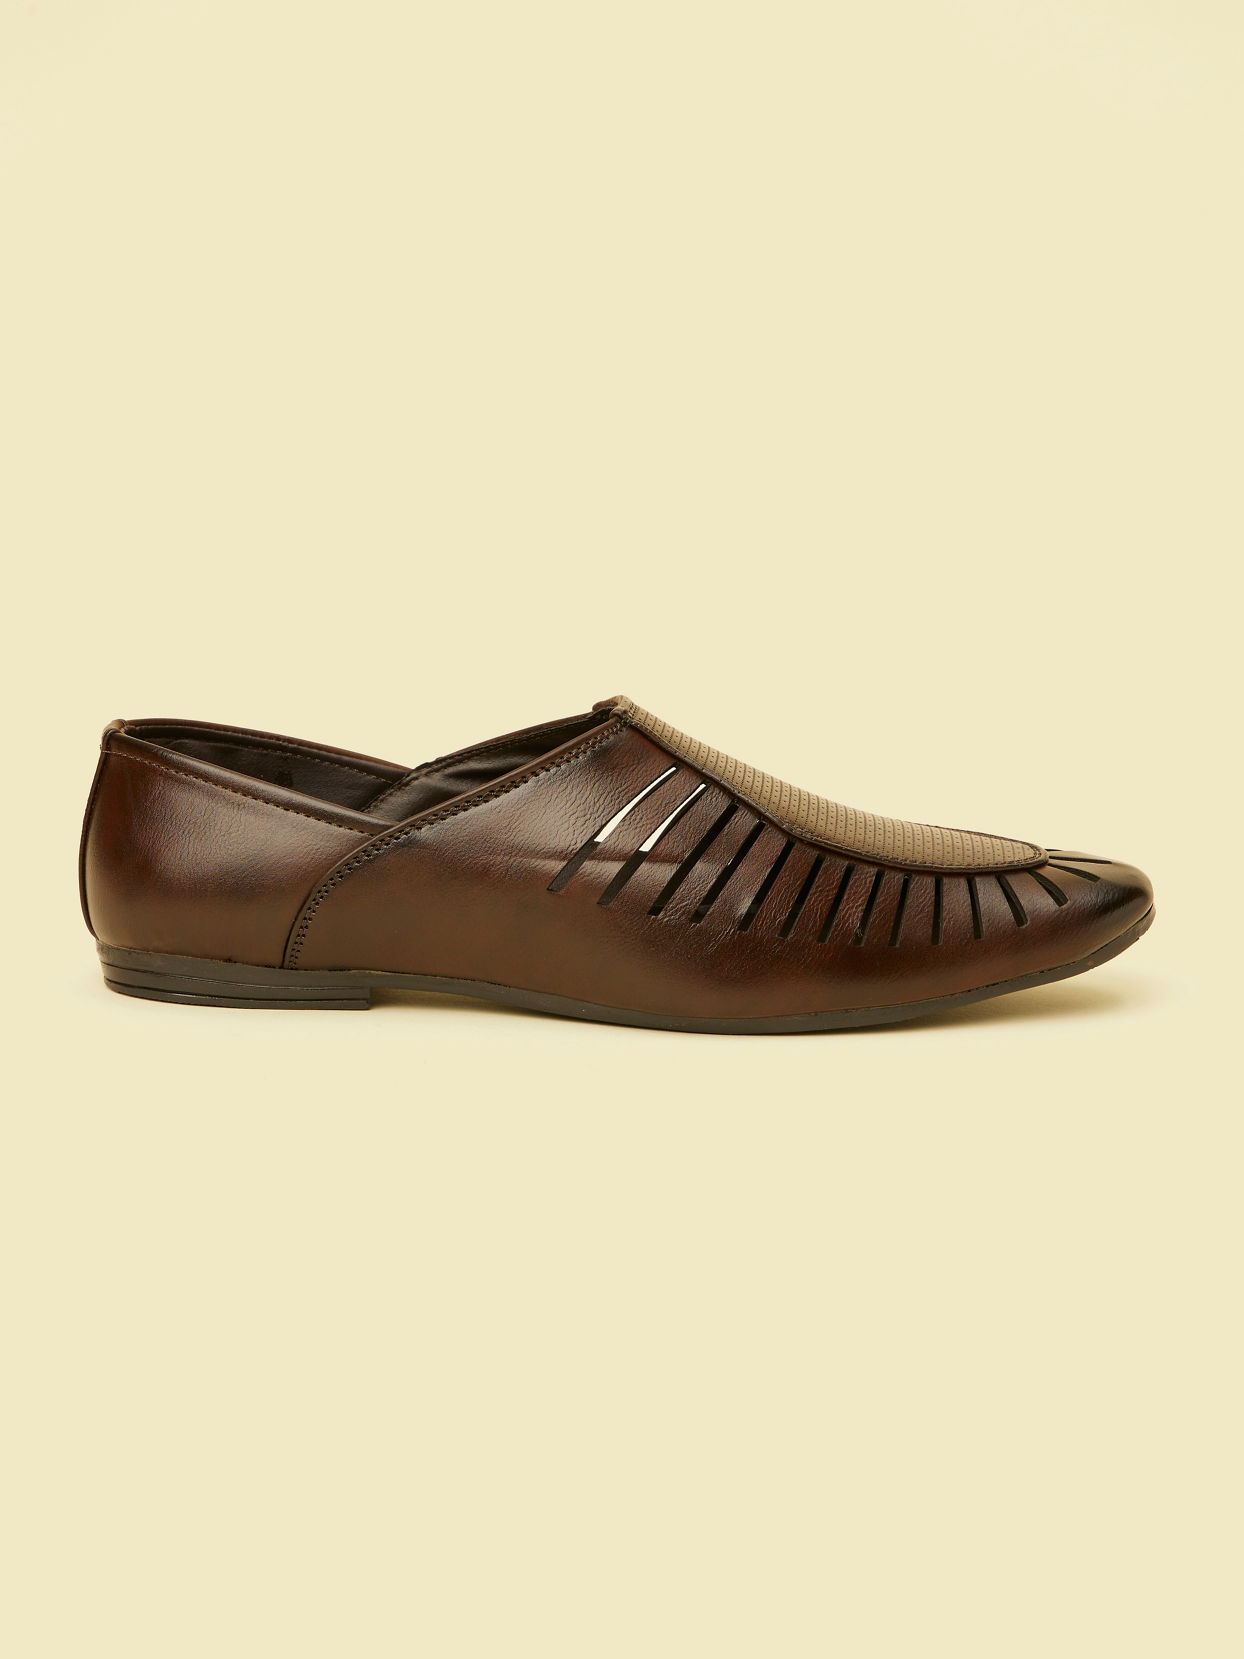 Dark Brown Loafers Style Shoes image number 2